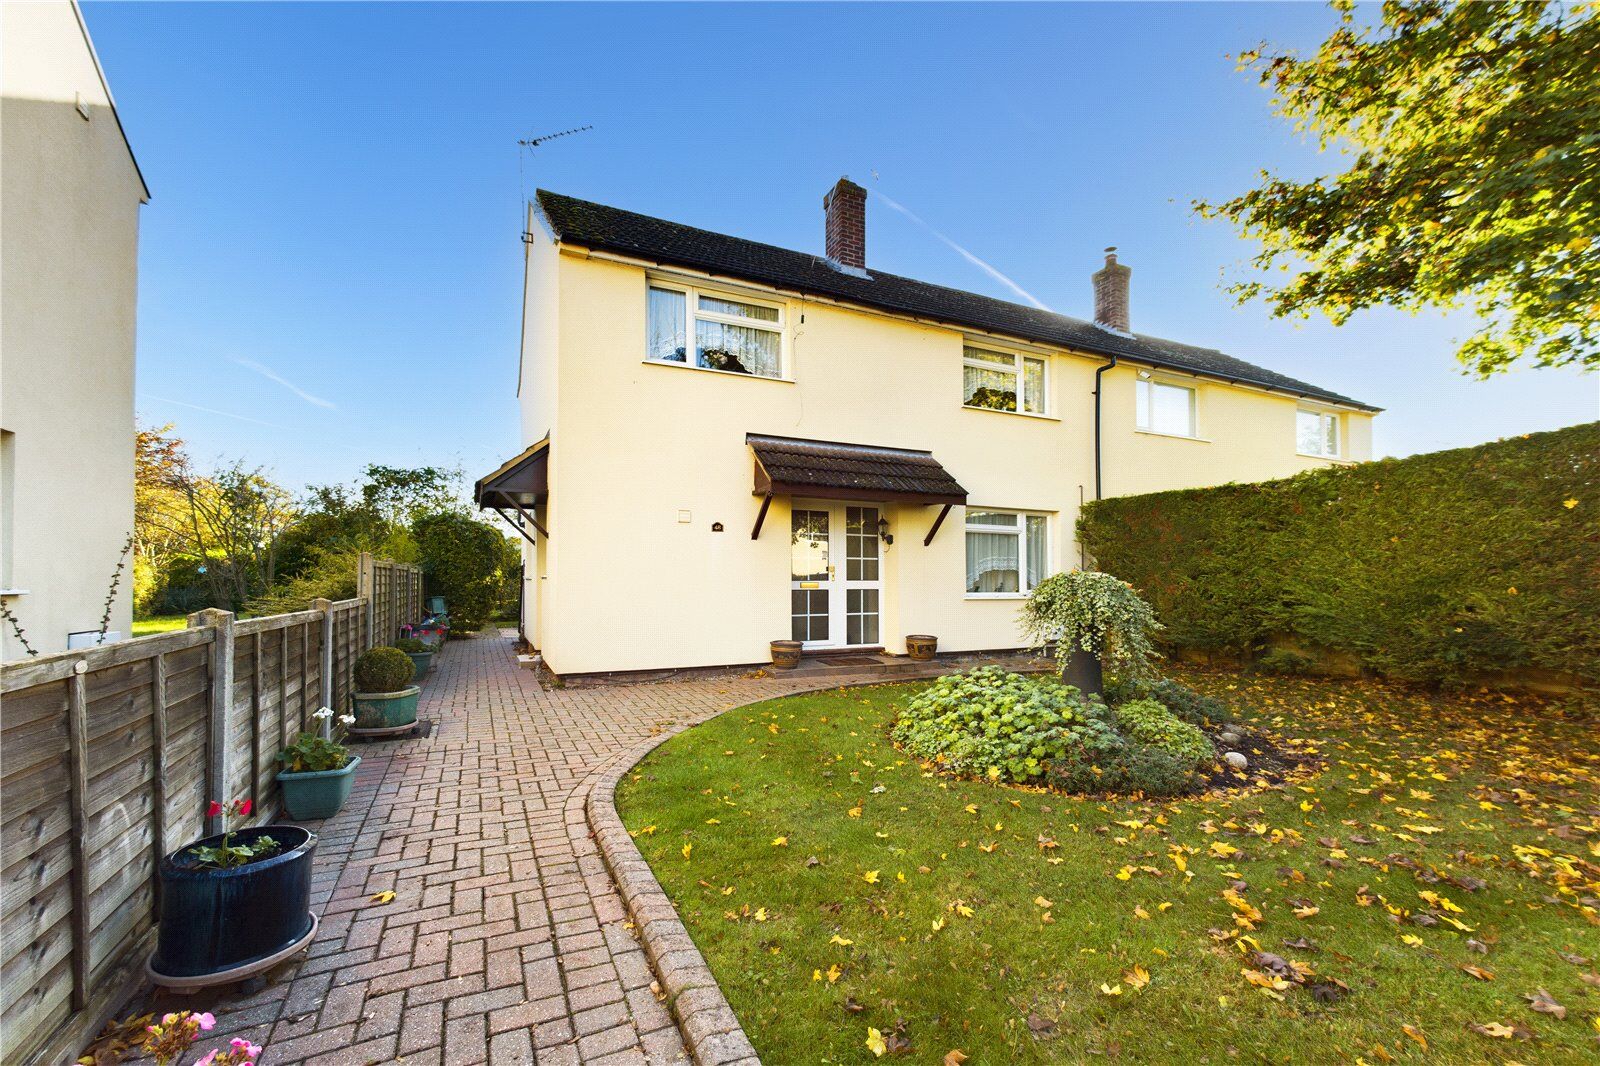 3 bedroom semi detached house for sale Rectory Road, Duxford, CB22, main image